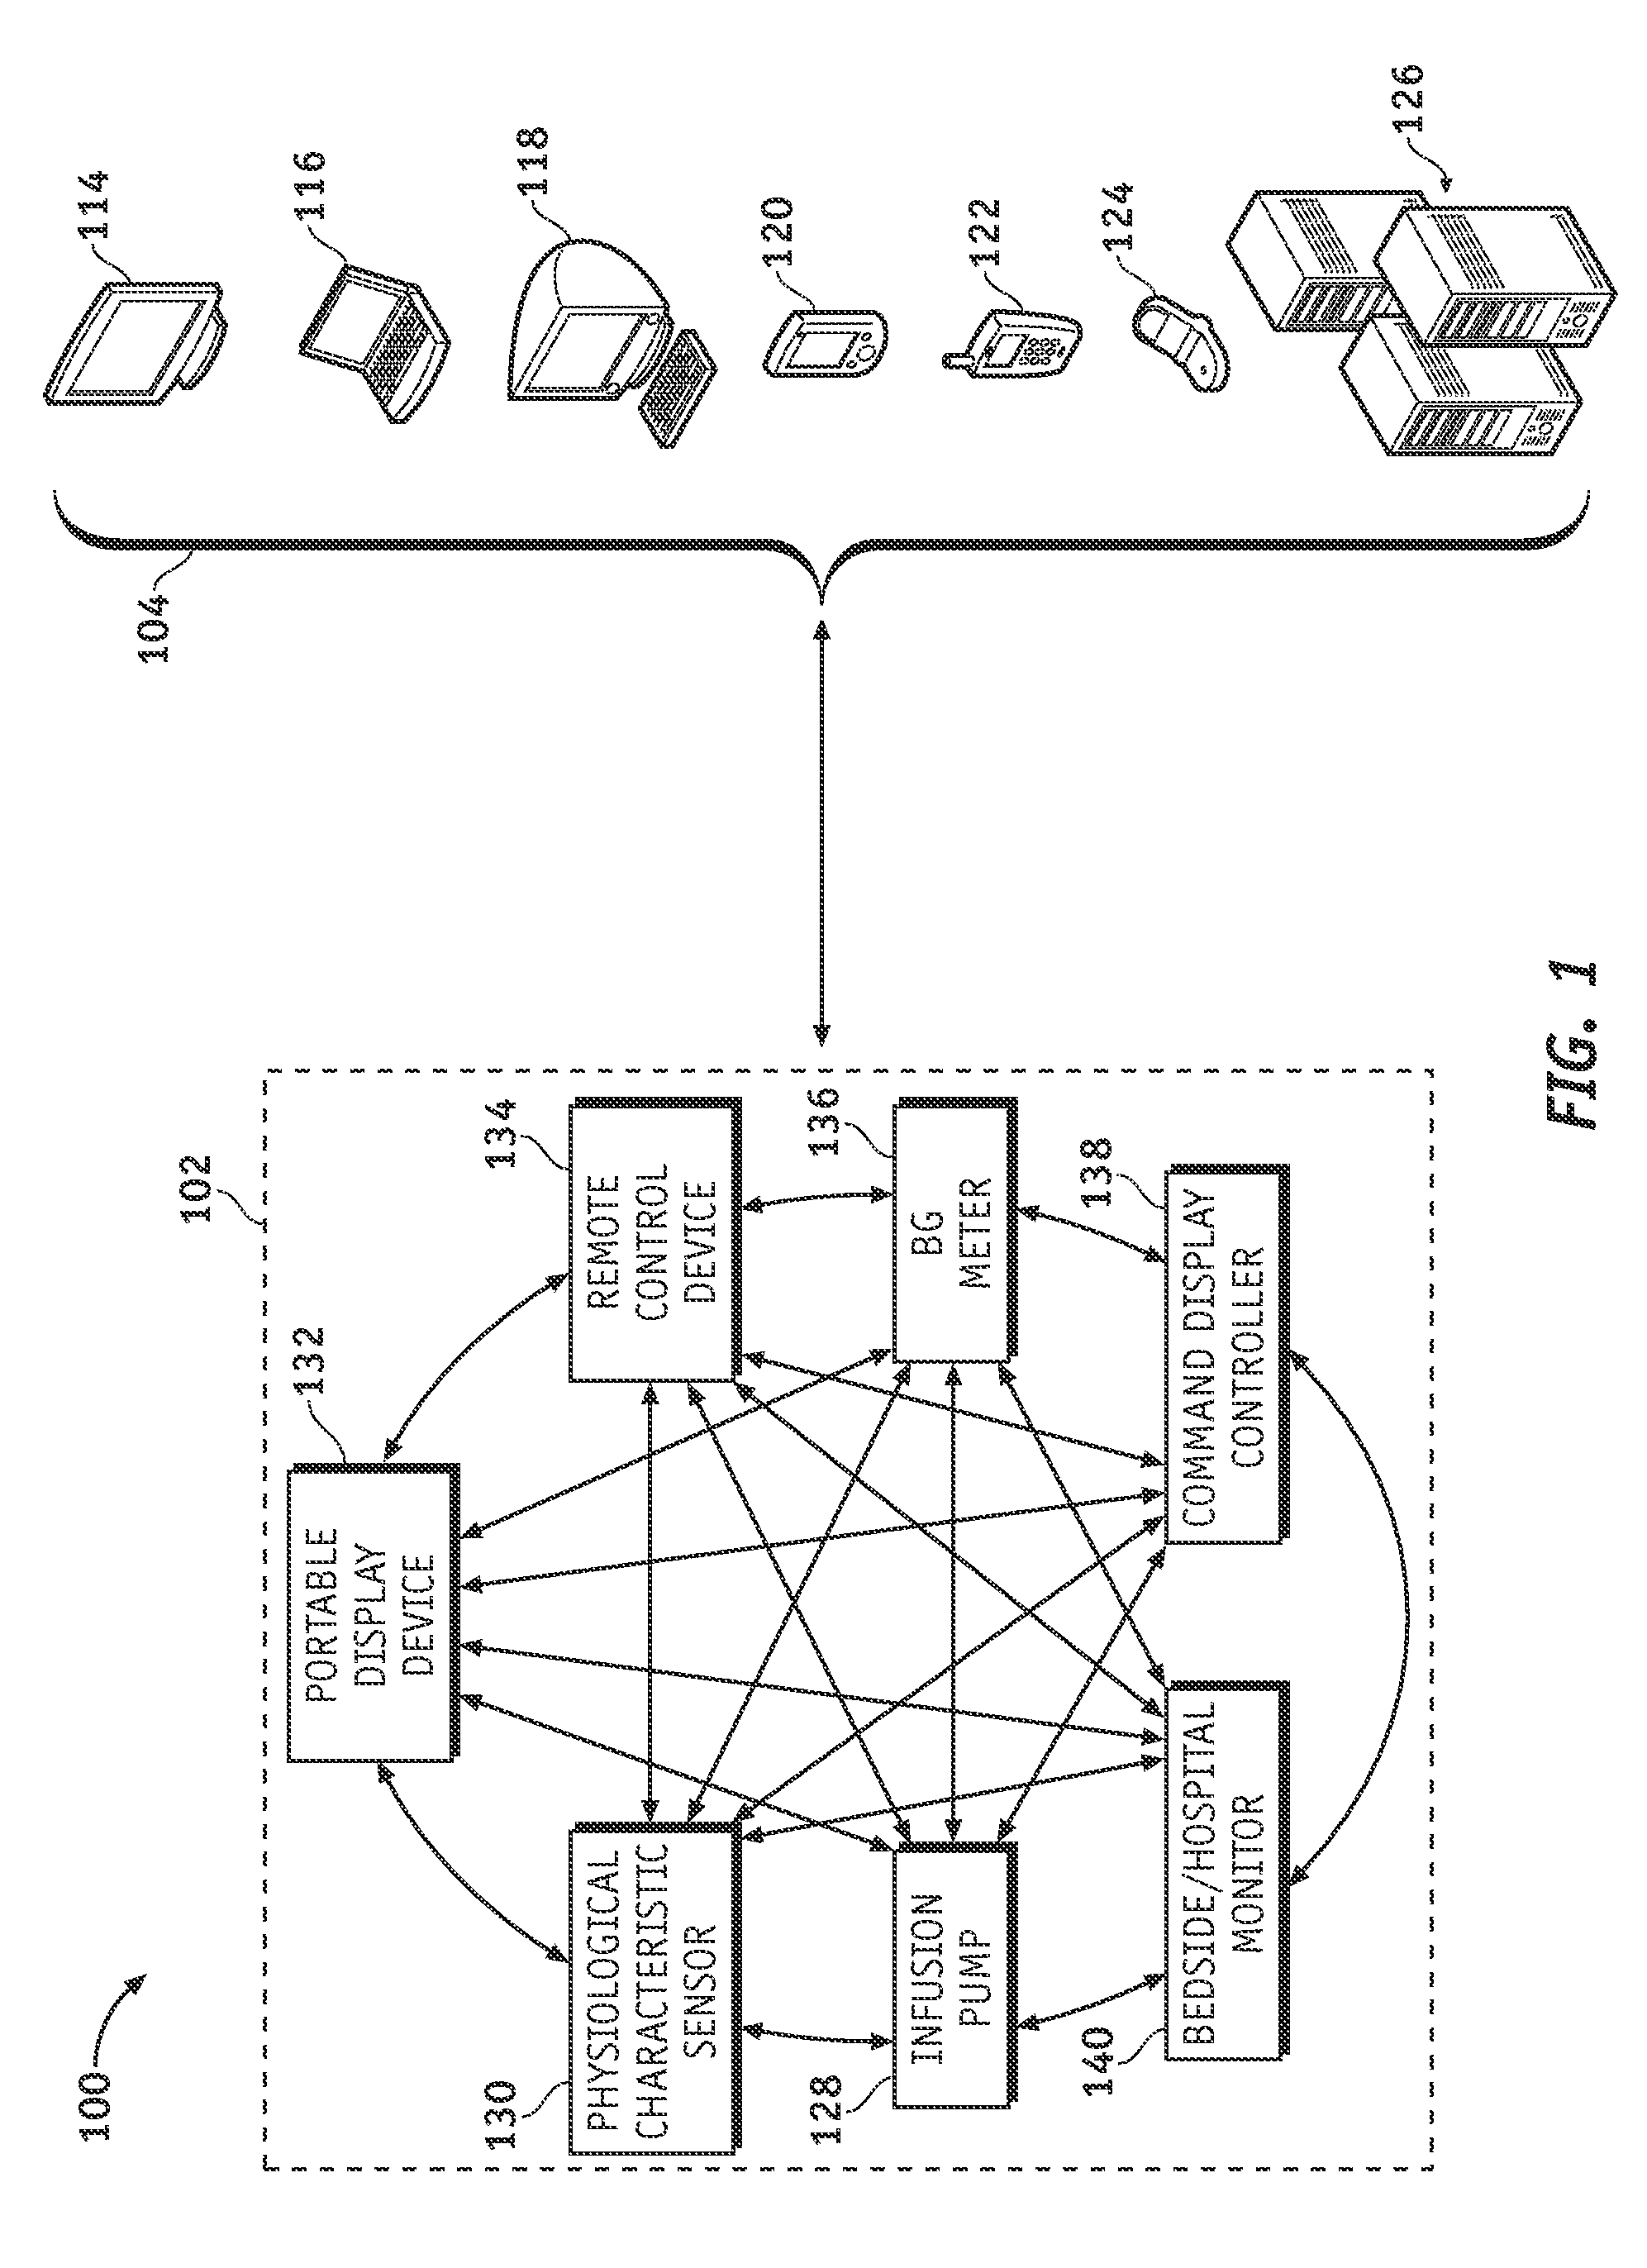 System and method for variable beacon timing with wireless devices